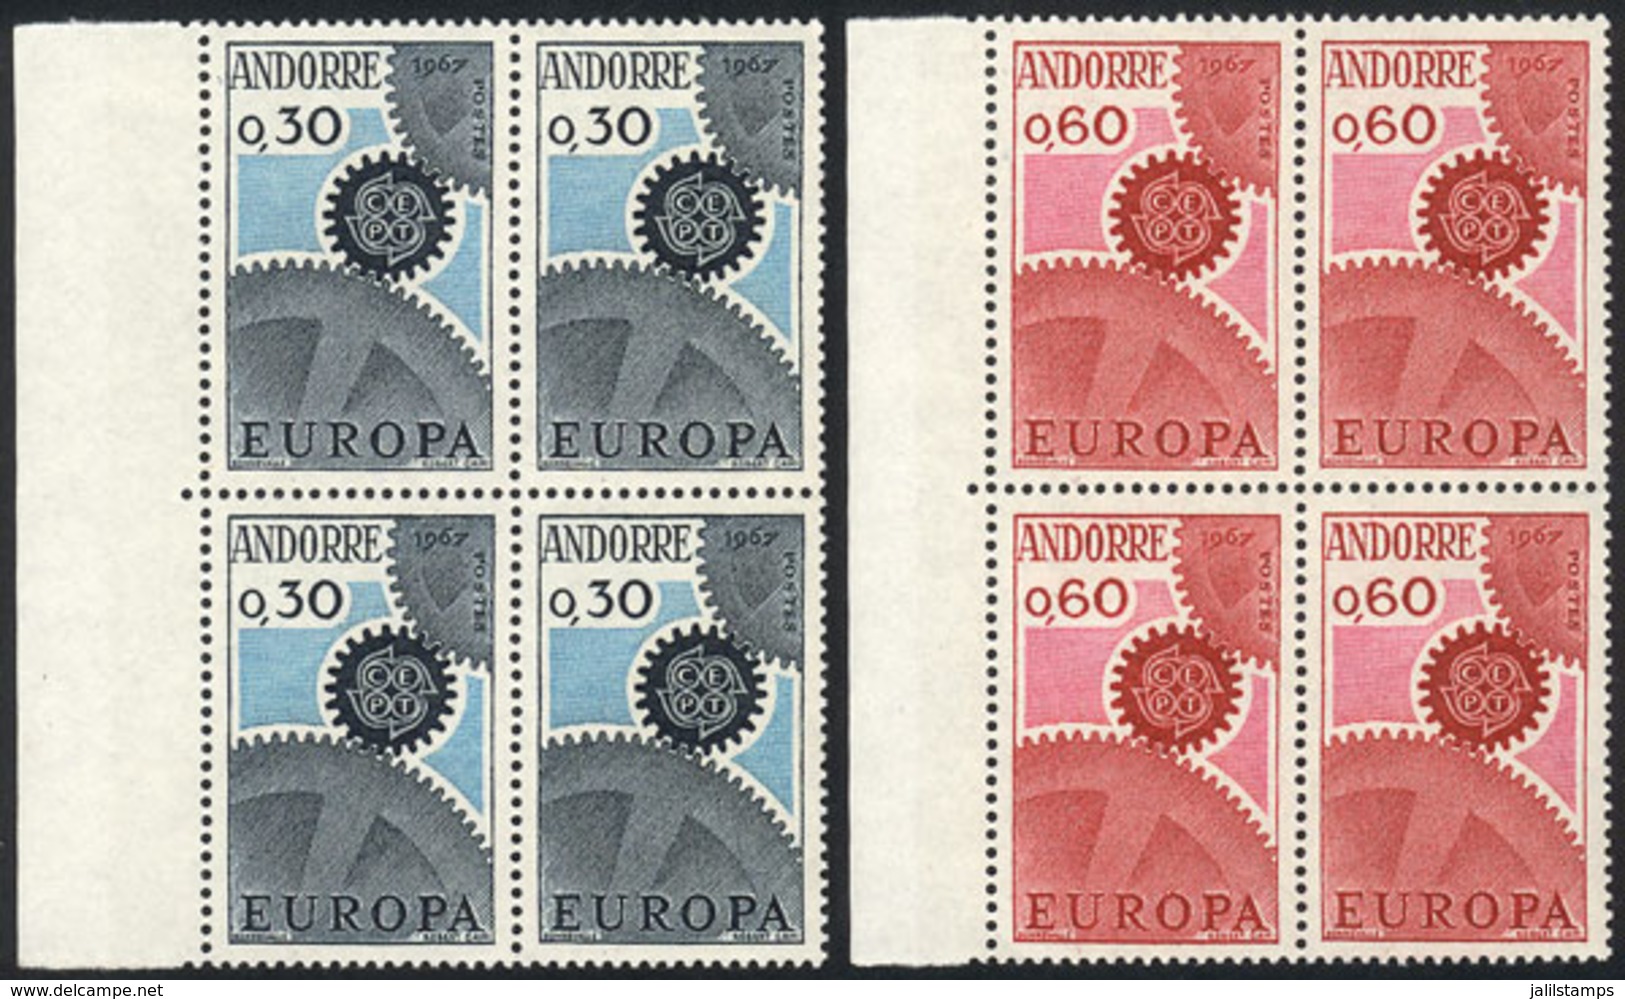 FRENCH ANDORRA: Yvert 179/180, 1967 Topic Europa, MNH Blocks Of 4, Excellent Quality, Catalog Value Euros 100. - Neufs